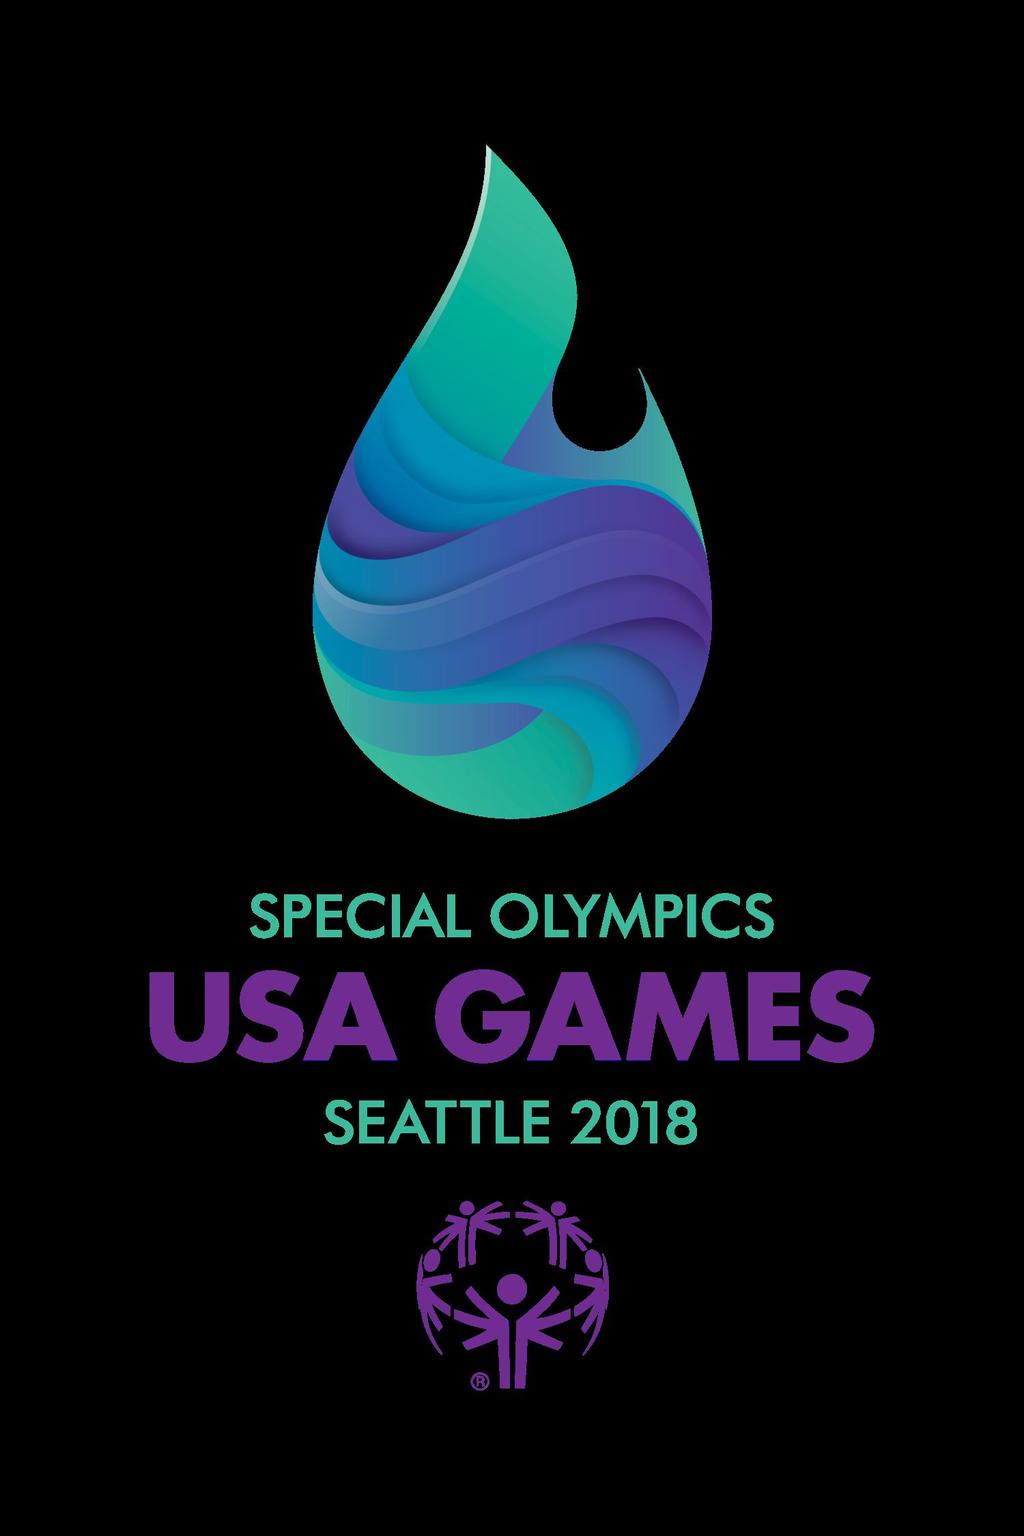 SPECIAL EVENTS: Team PA: USA Games Info Session WELCOME DAY JUNE 29-30 SEATAC INTERNATIONAL AIRPORT OPENING CEREMONY JULY 1 HUSKY STADIUM 12:30 PM (Open to Everybody) SPECIAL OLYMPICS TOWN JULY 1-5